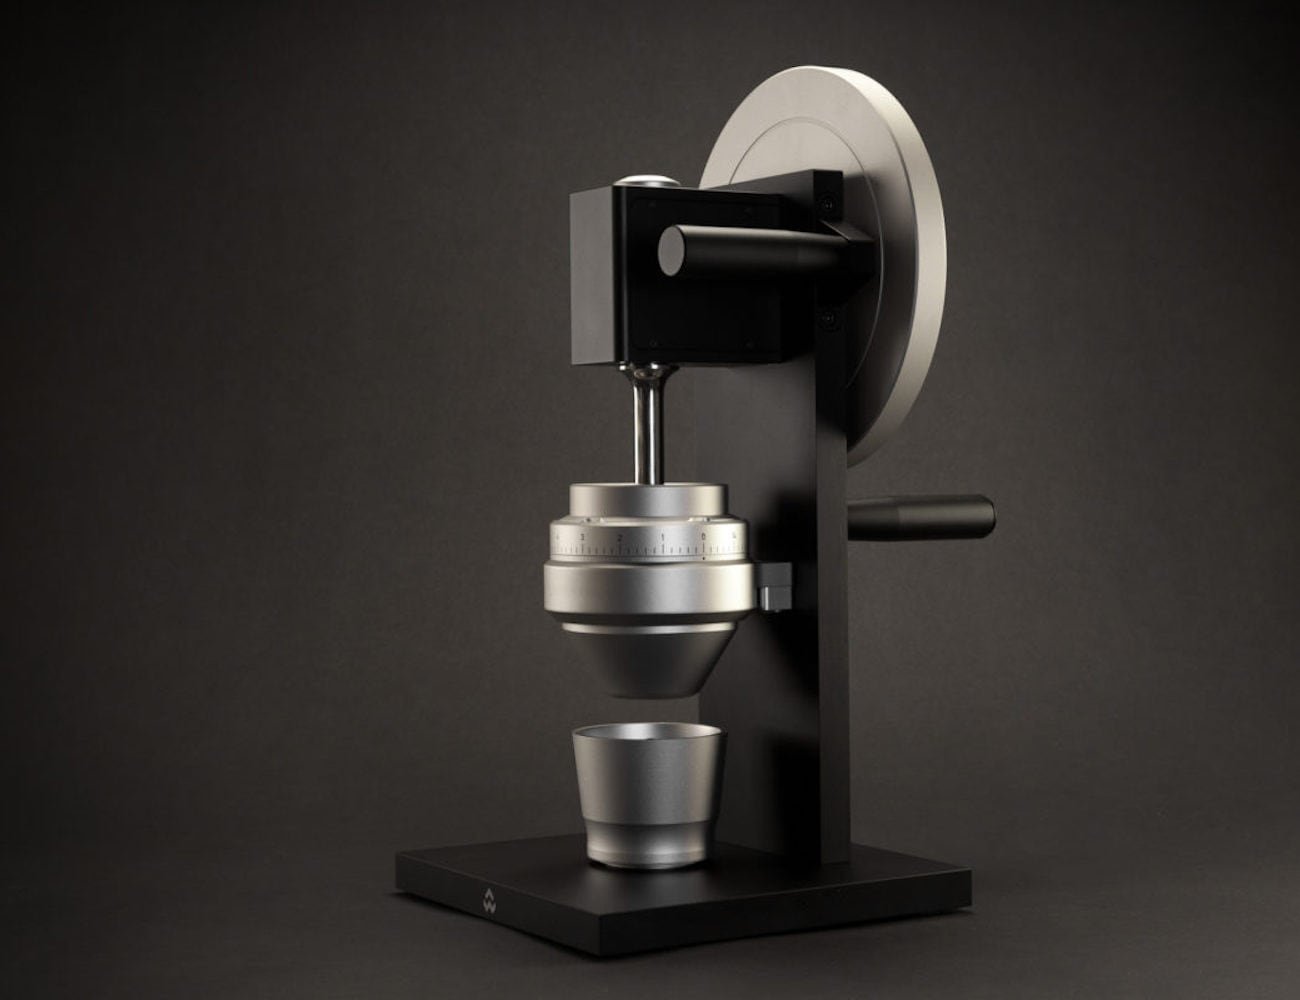 HG-1 One-Handed Countertop Coffee Grinder brings the coffee shop to your kitchen